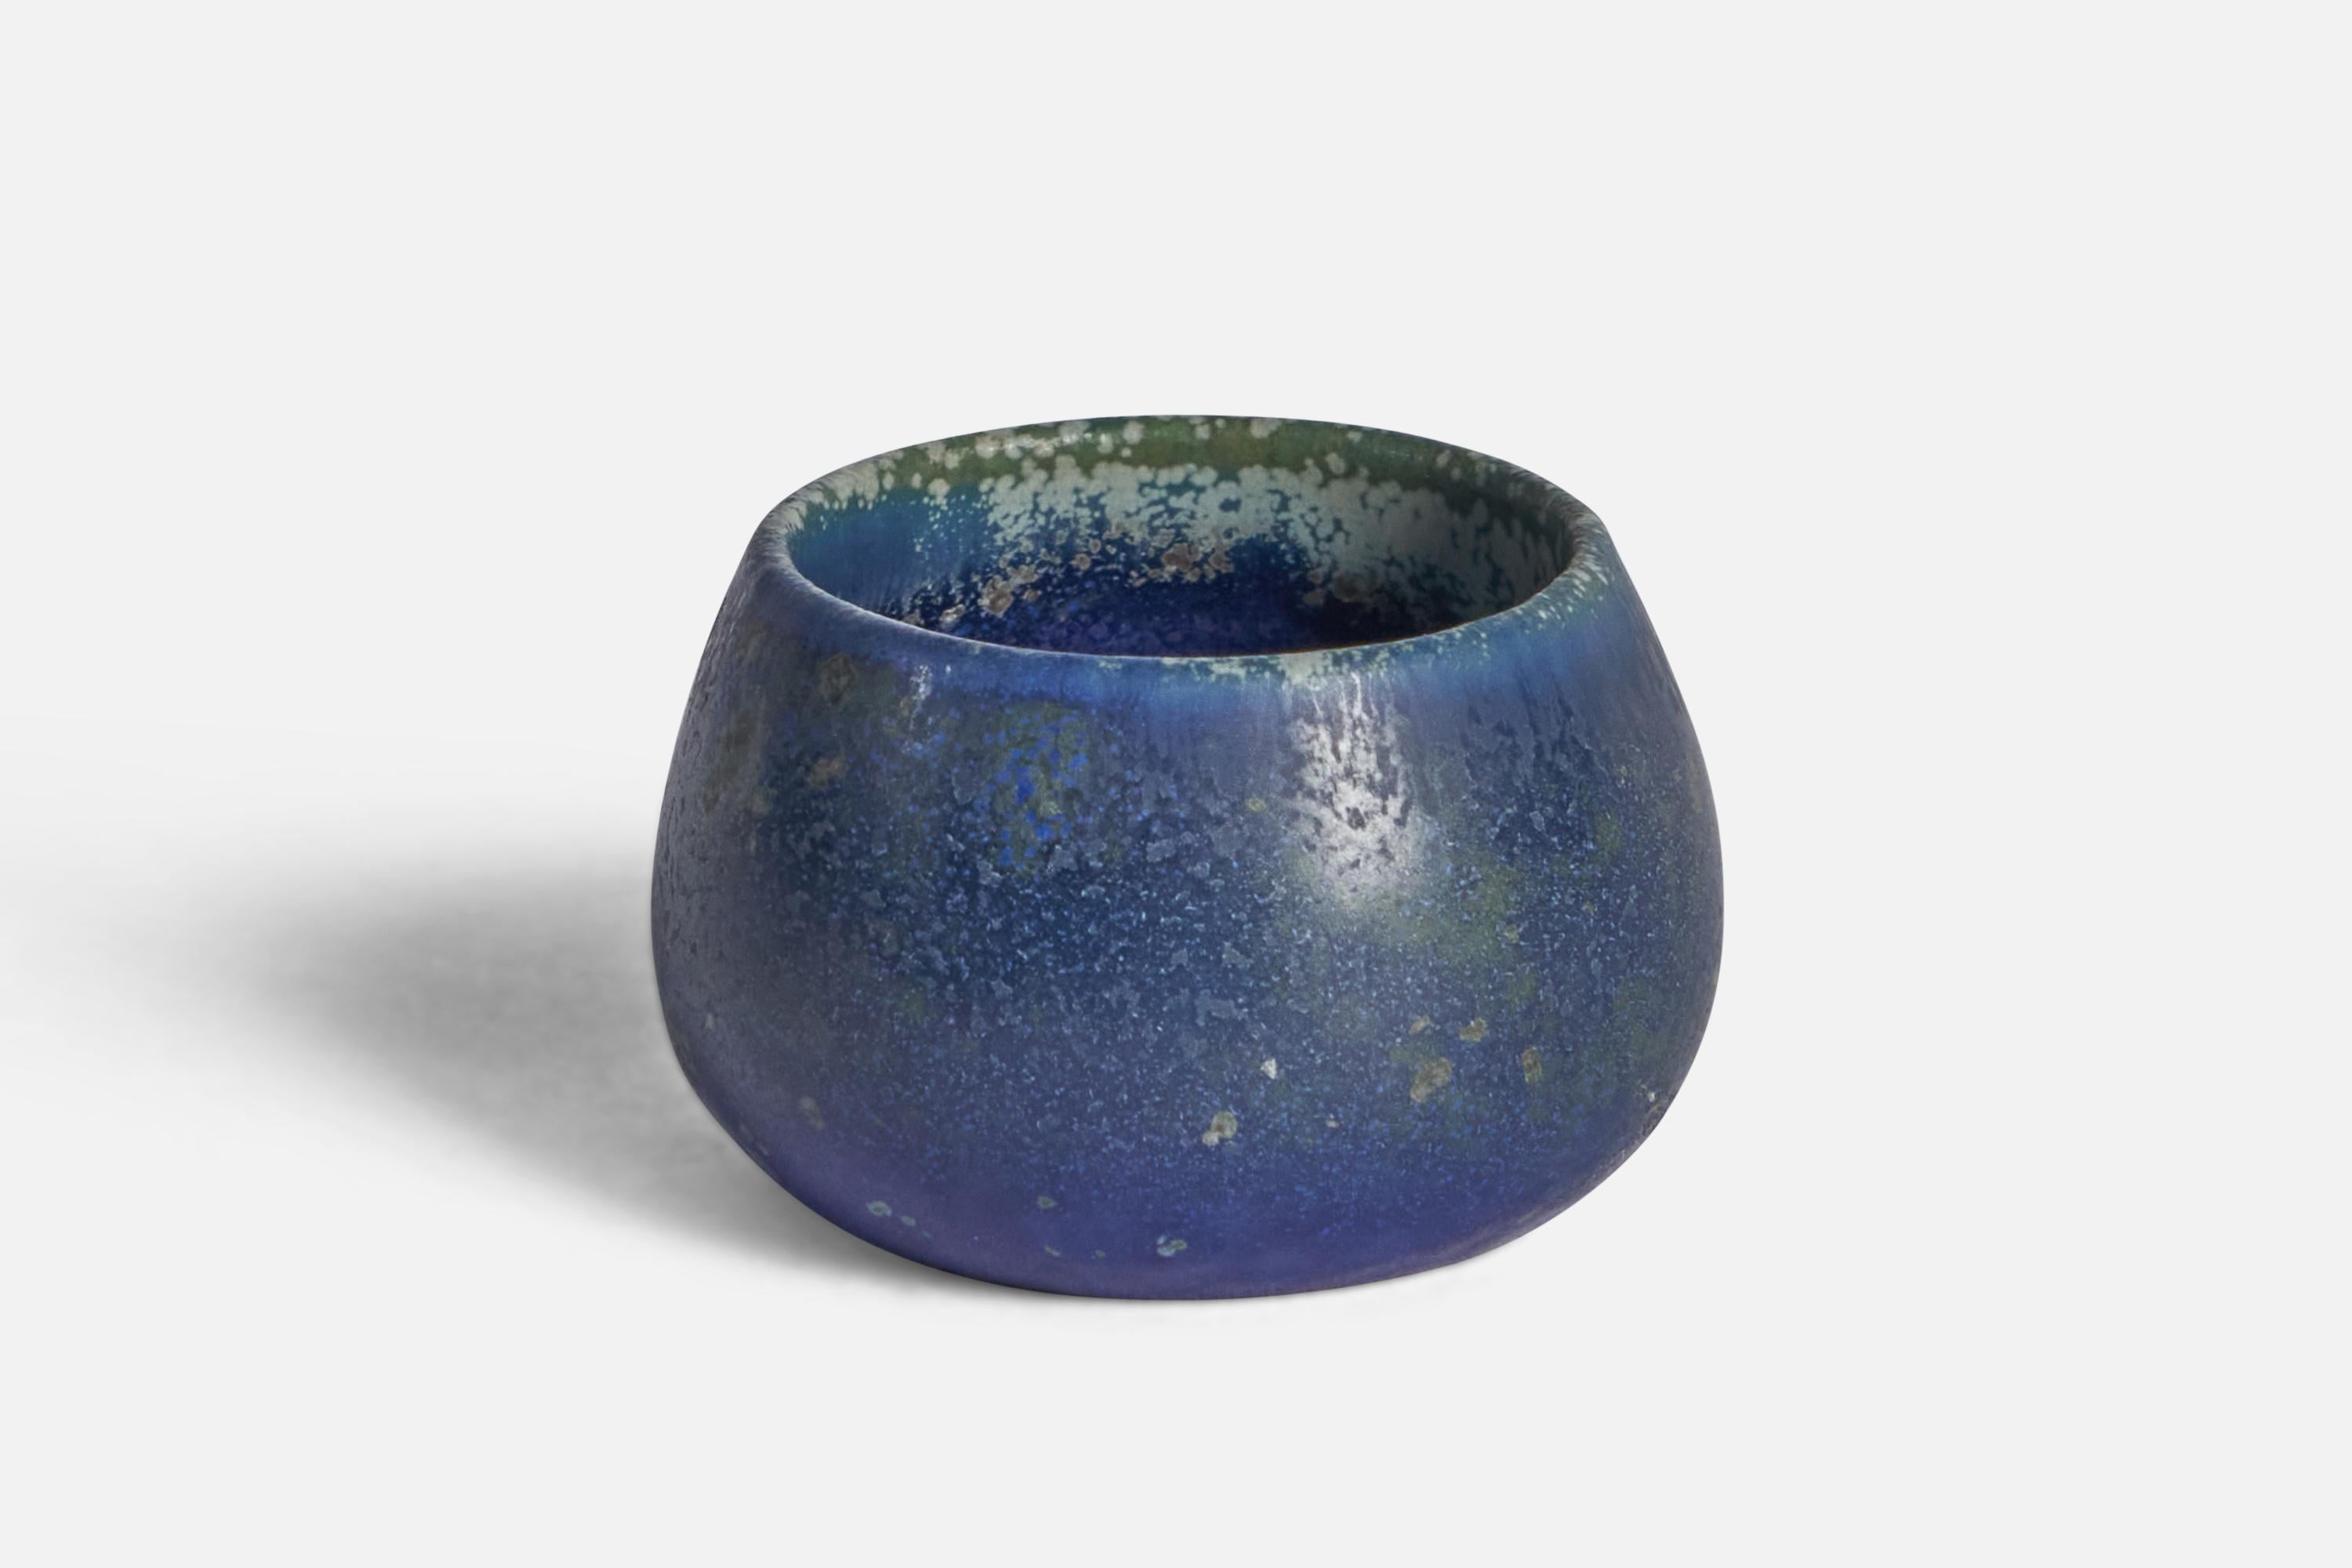 A blue-glazed miniature stoneware bowl designed by Carl-Harry Stålhane and produced by Rörstrand, Sweden, 1950s.